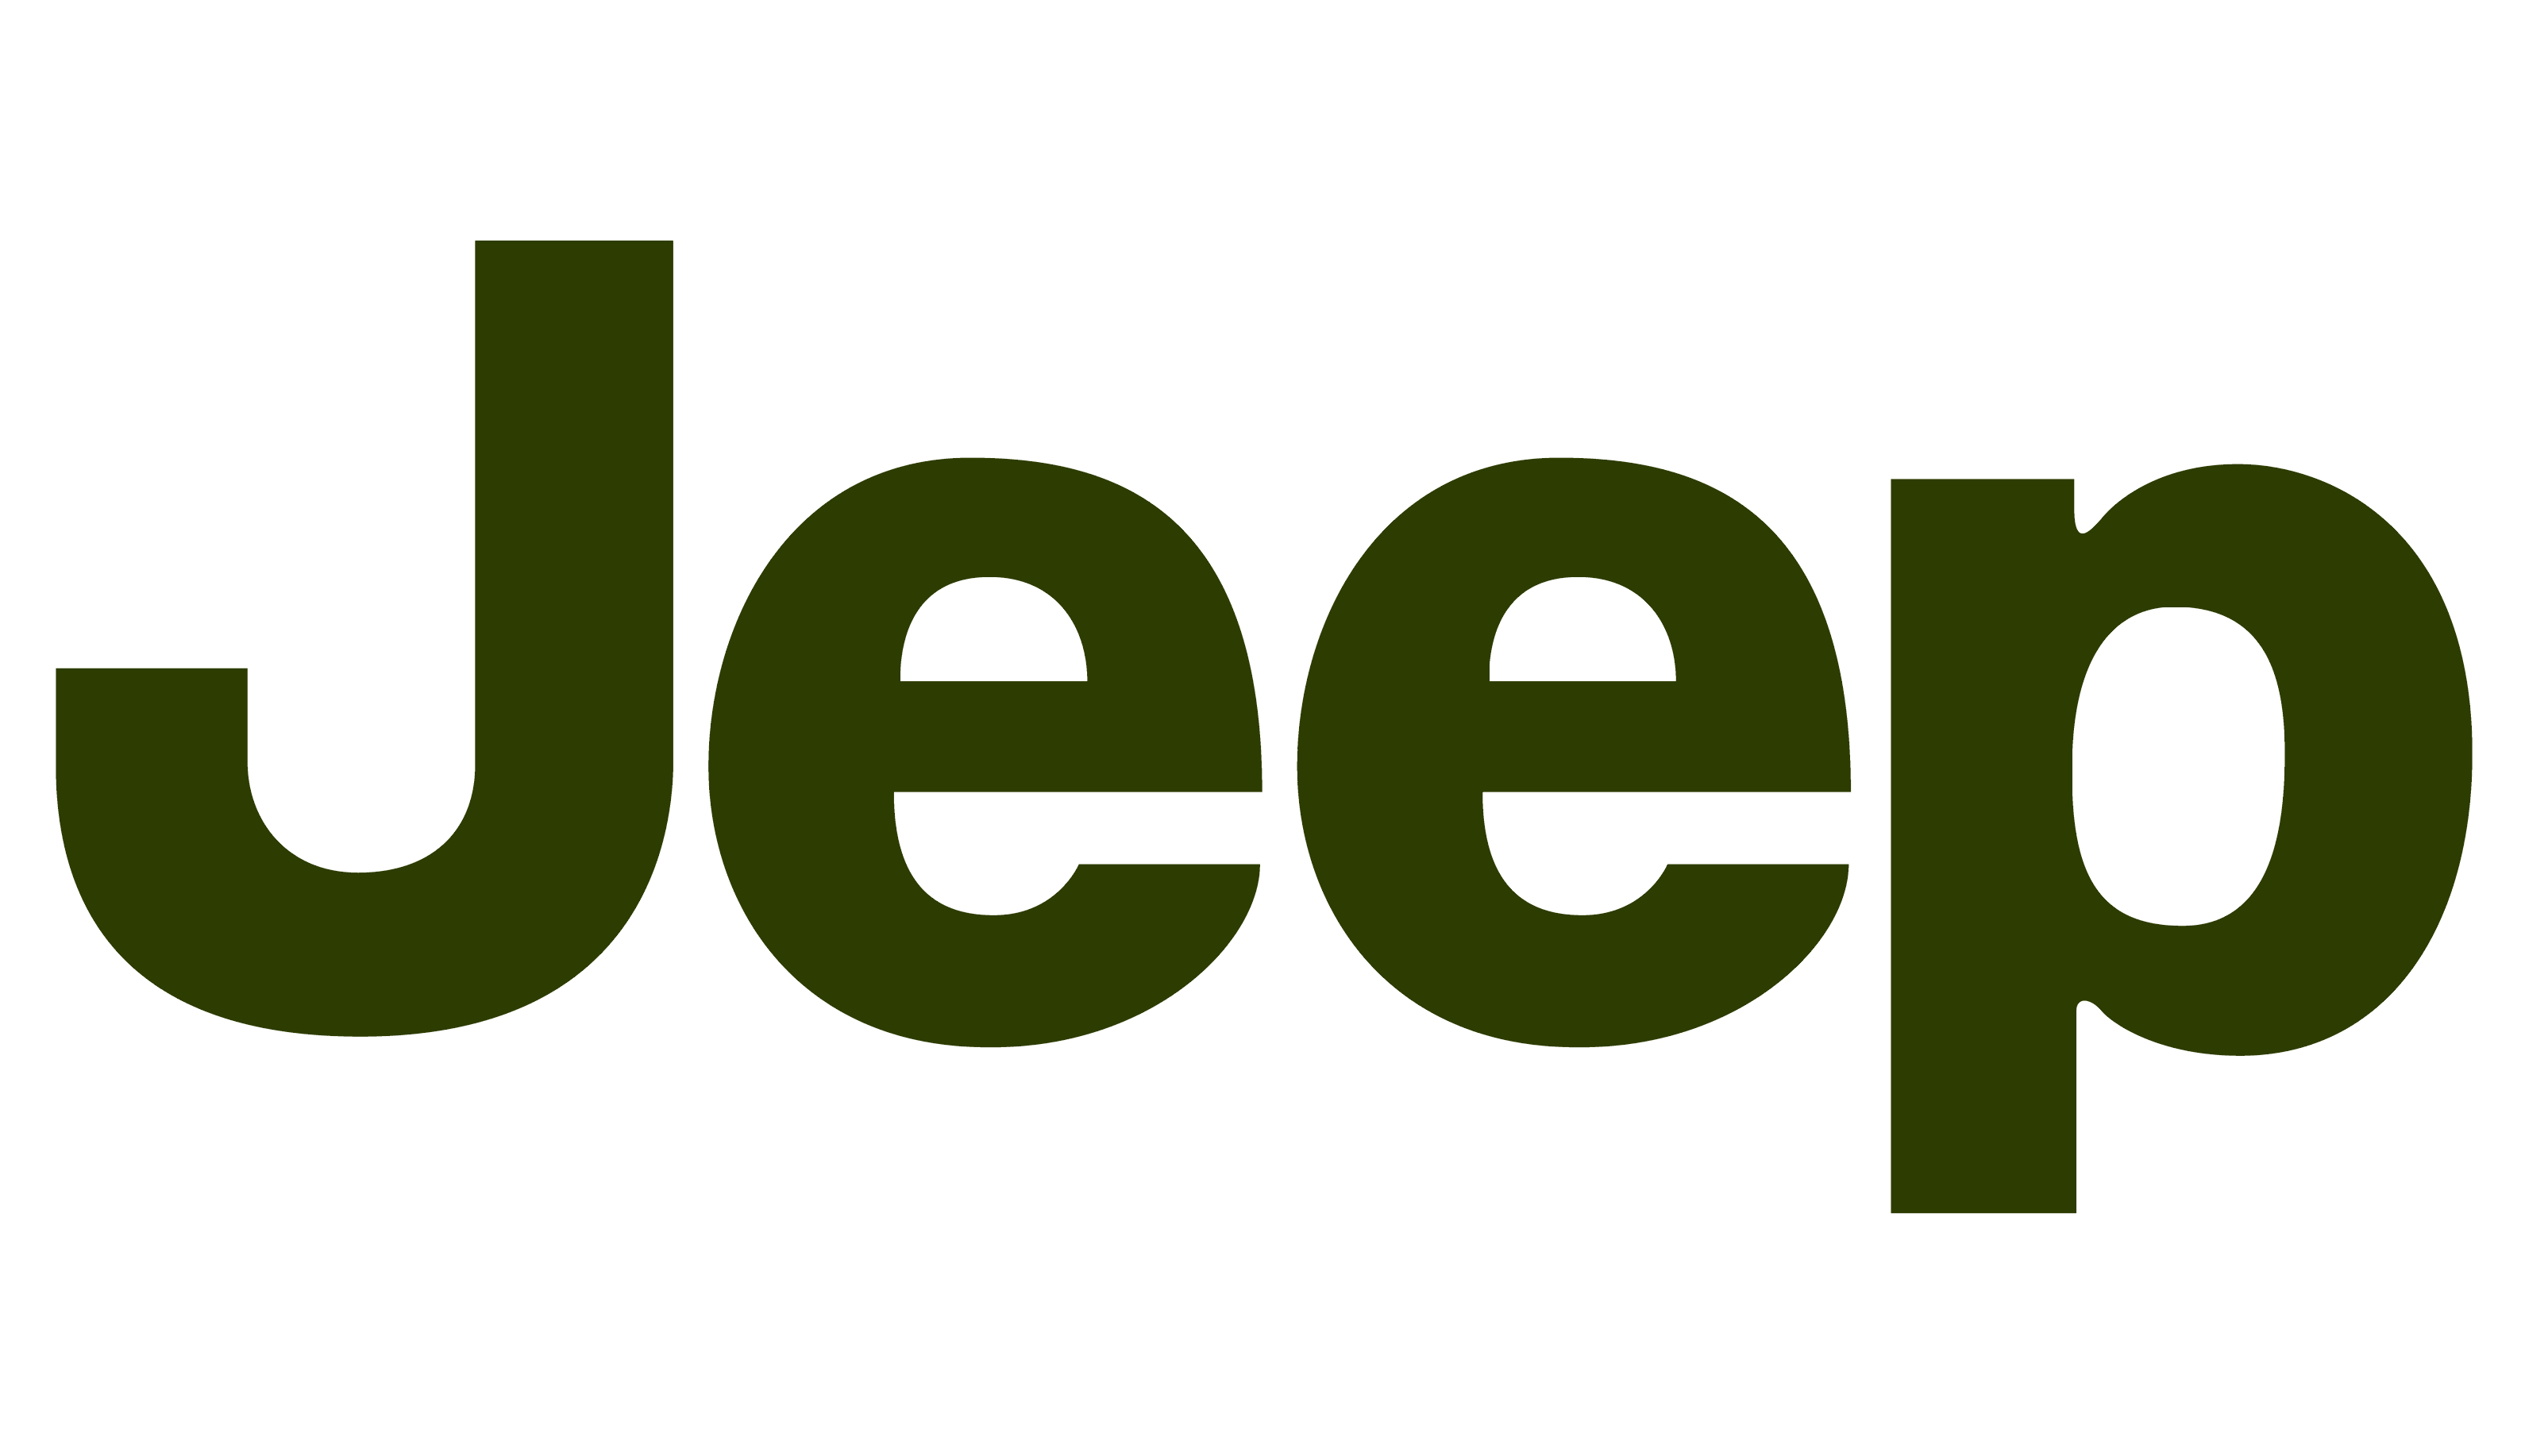 jeep certified collision logo